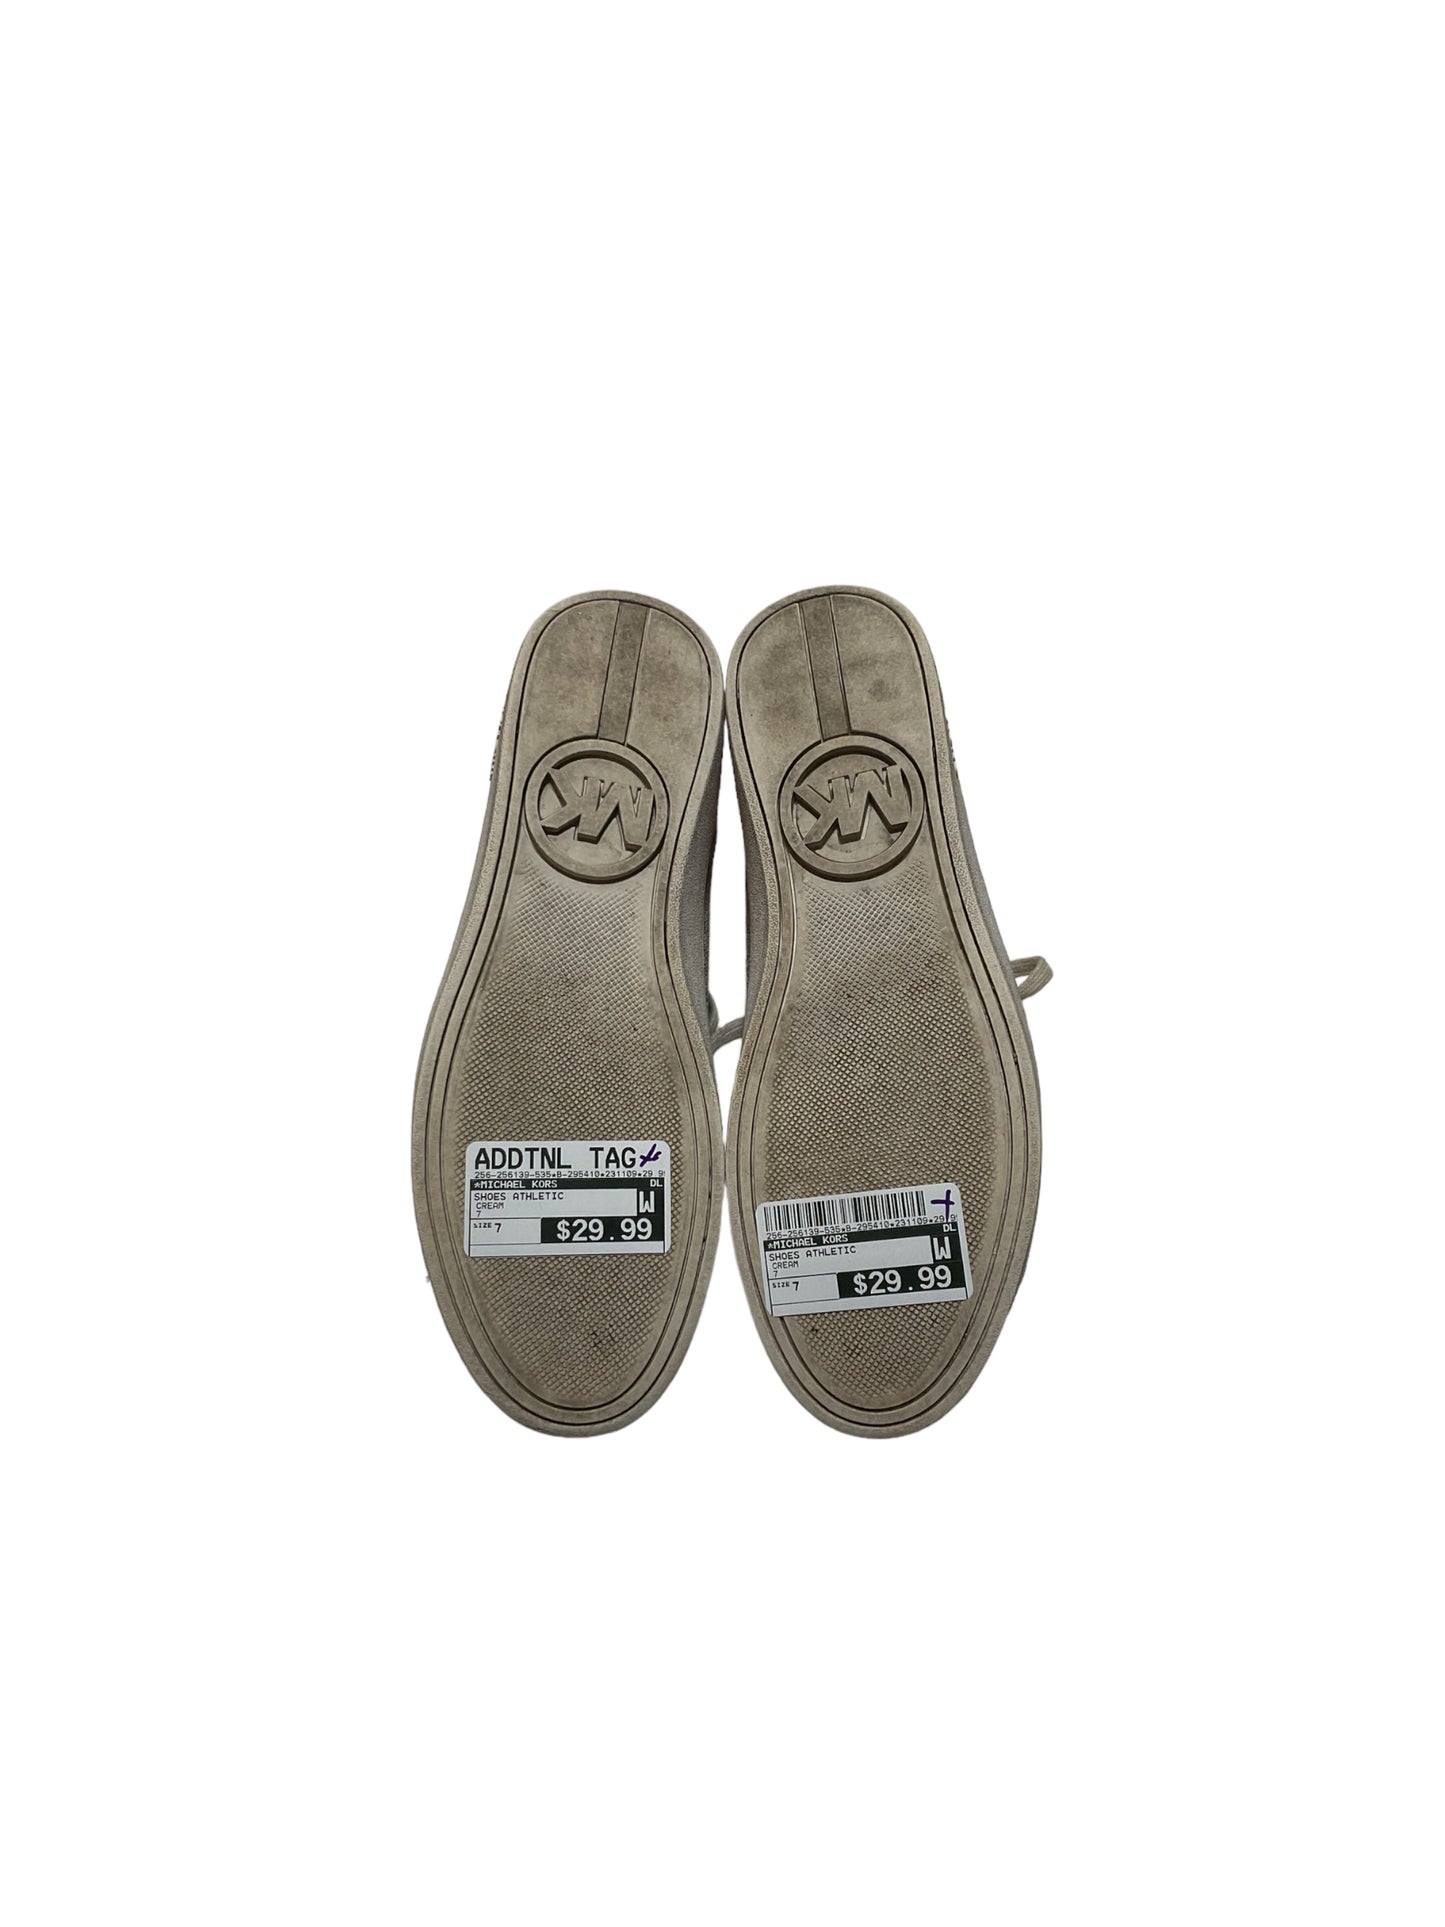 Shoes Athletic By Michael Kors  Size: 7